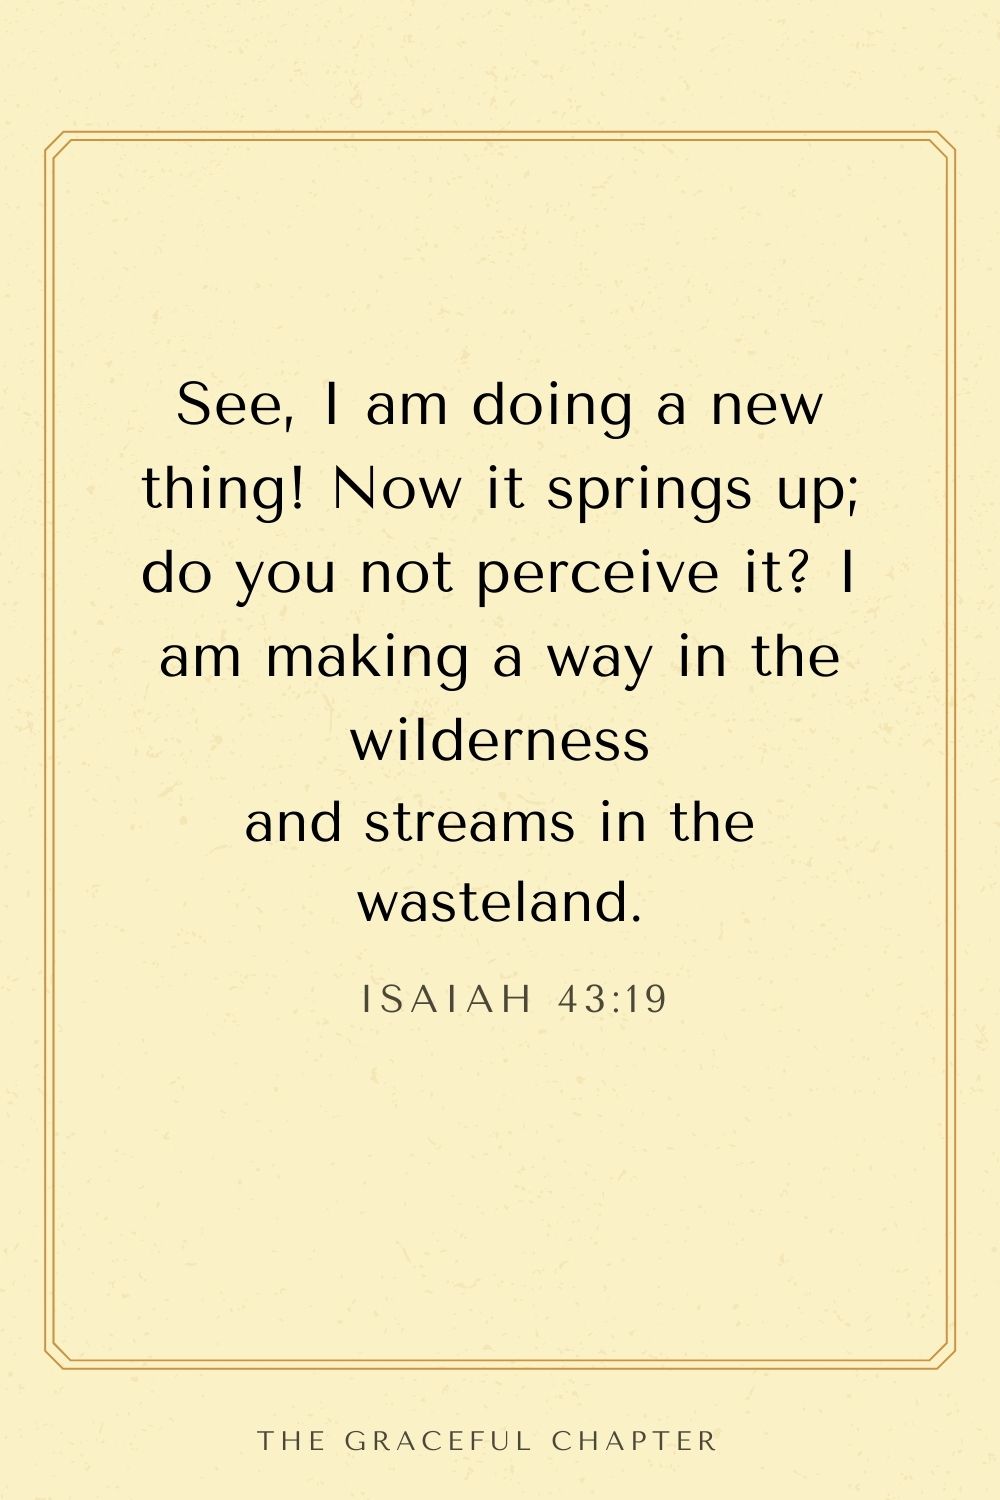 See, I am doing a new thing! Now it springs up; do you not perceive it? I am making a way in the wilderness and streams in the wasteland. Isaiah 43:19